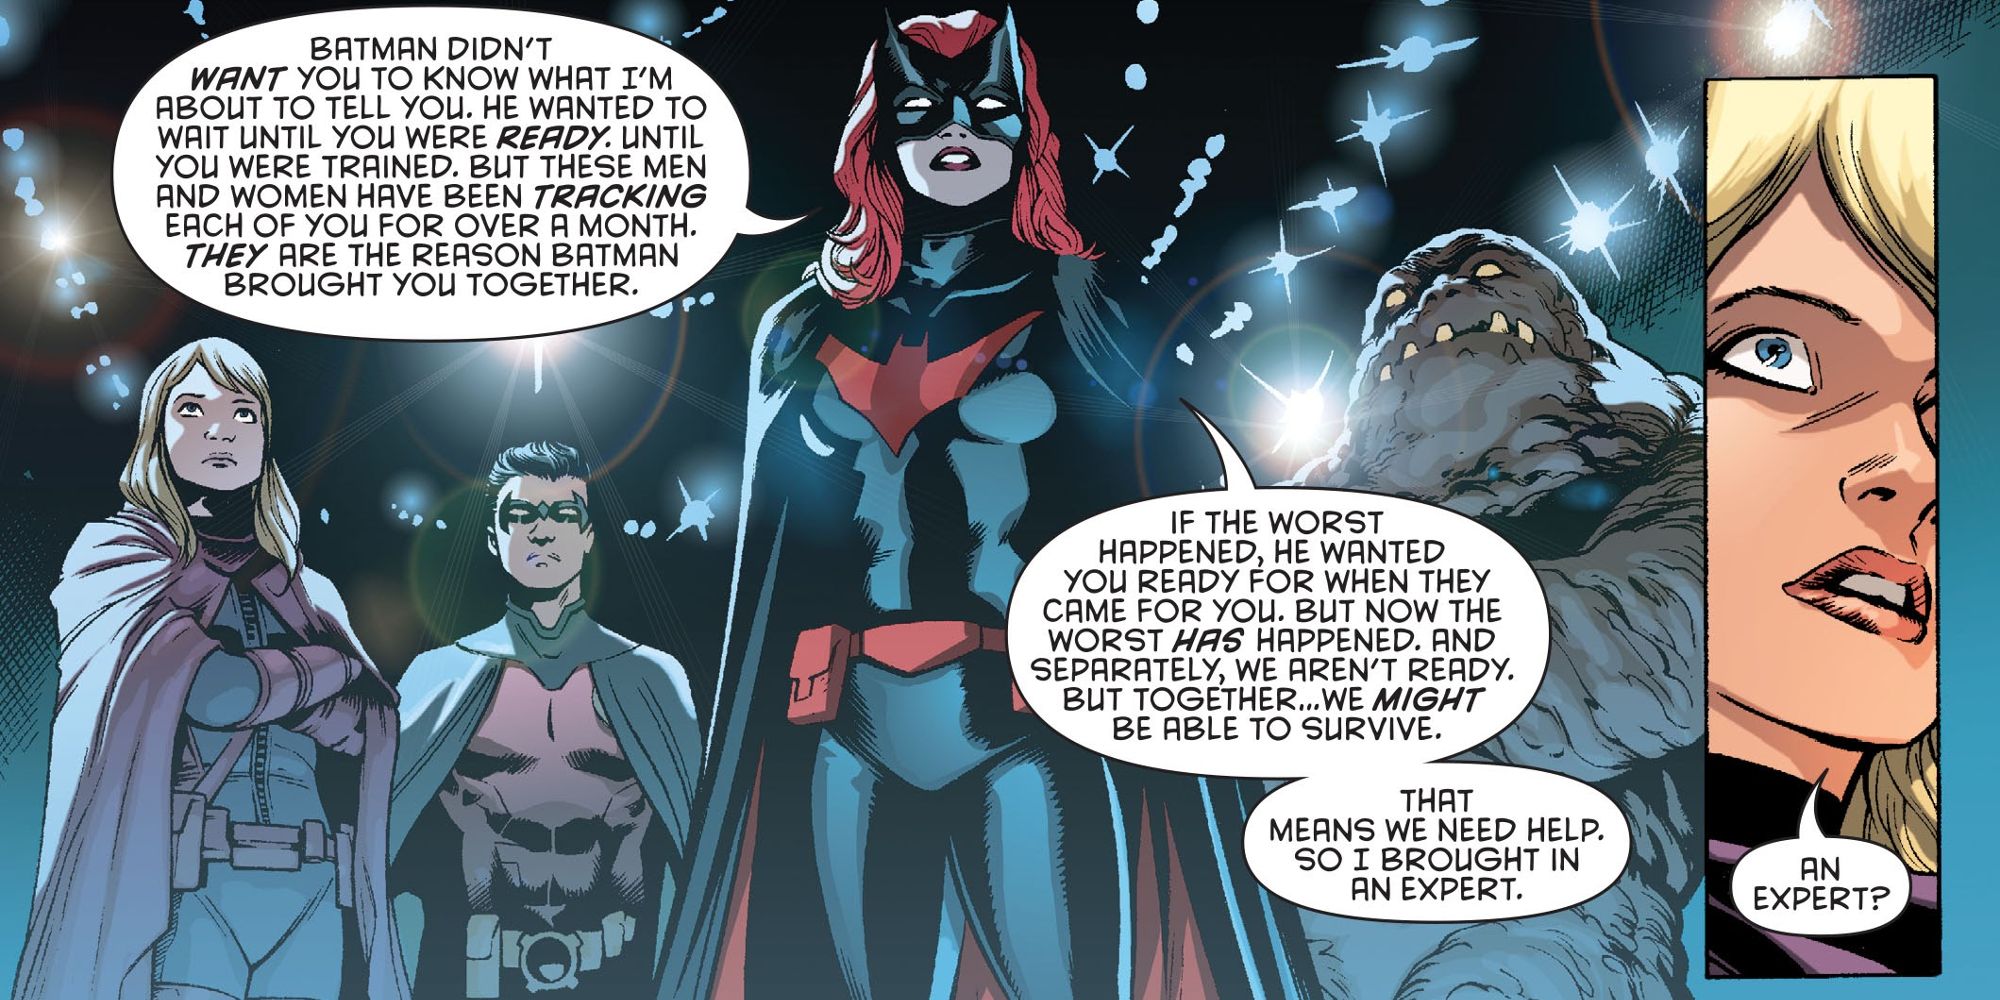 Batwoman leading her team with Tim Drake, Stephanie Brown, and Clayface in The Belfy in Rise Of The Batmen